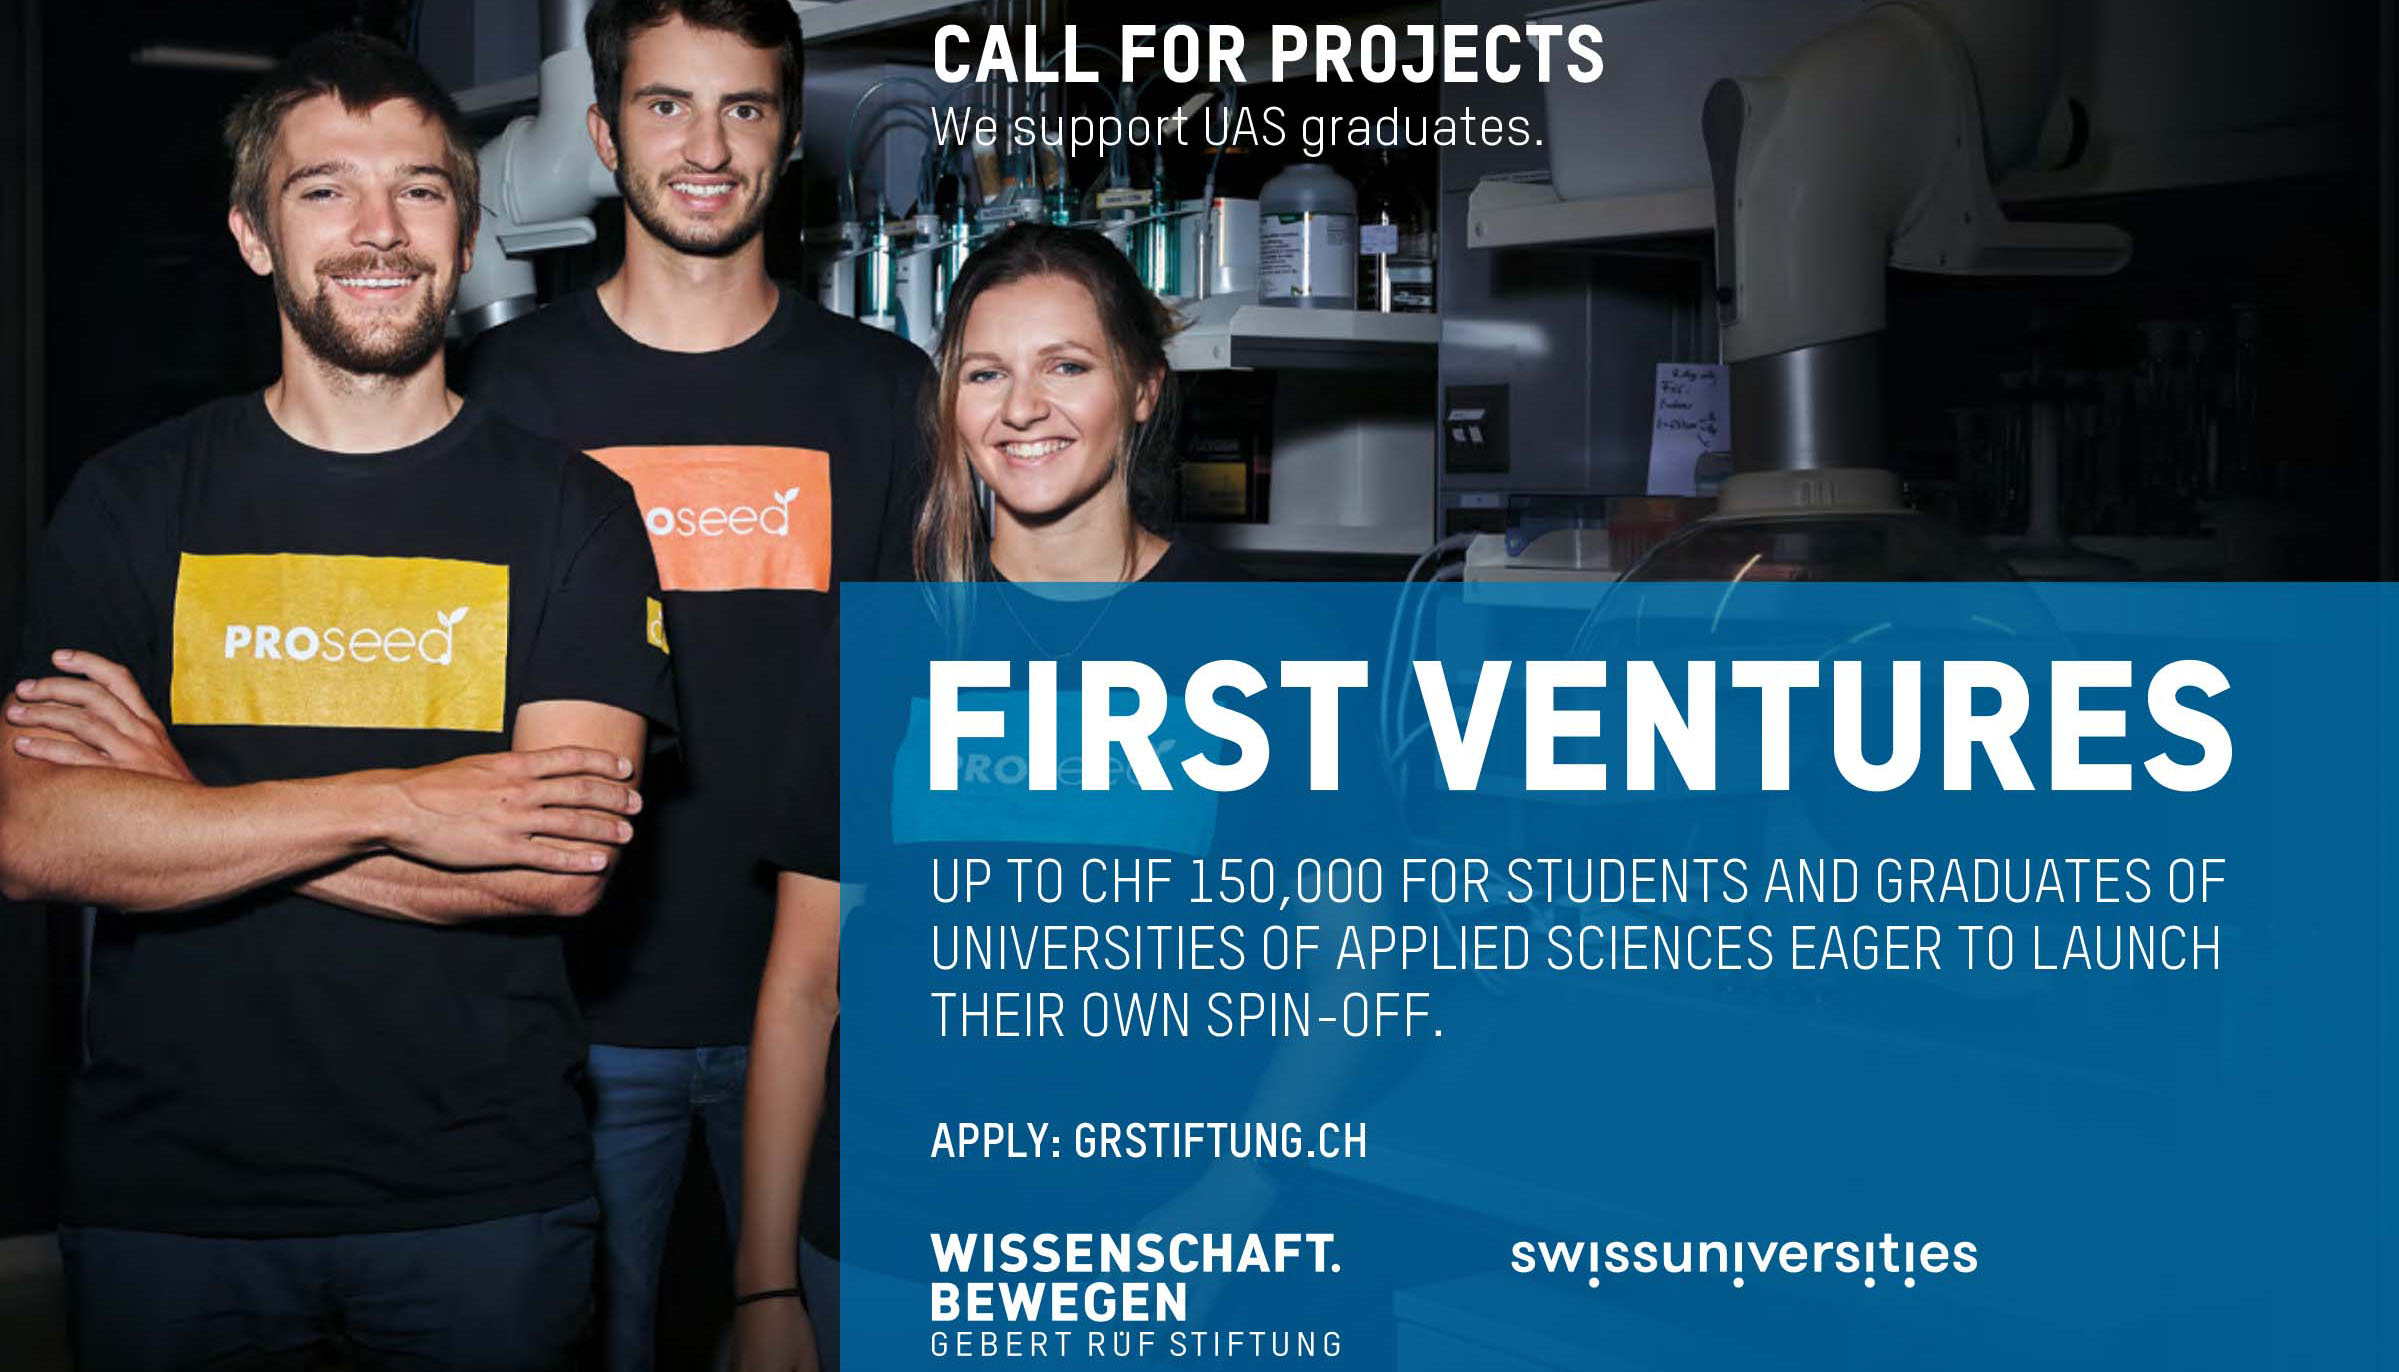 First Ventures ‒ Call for Projects